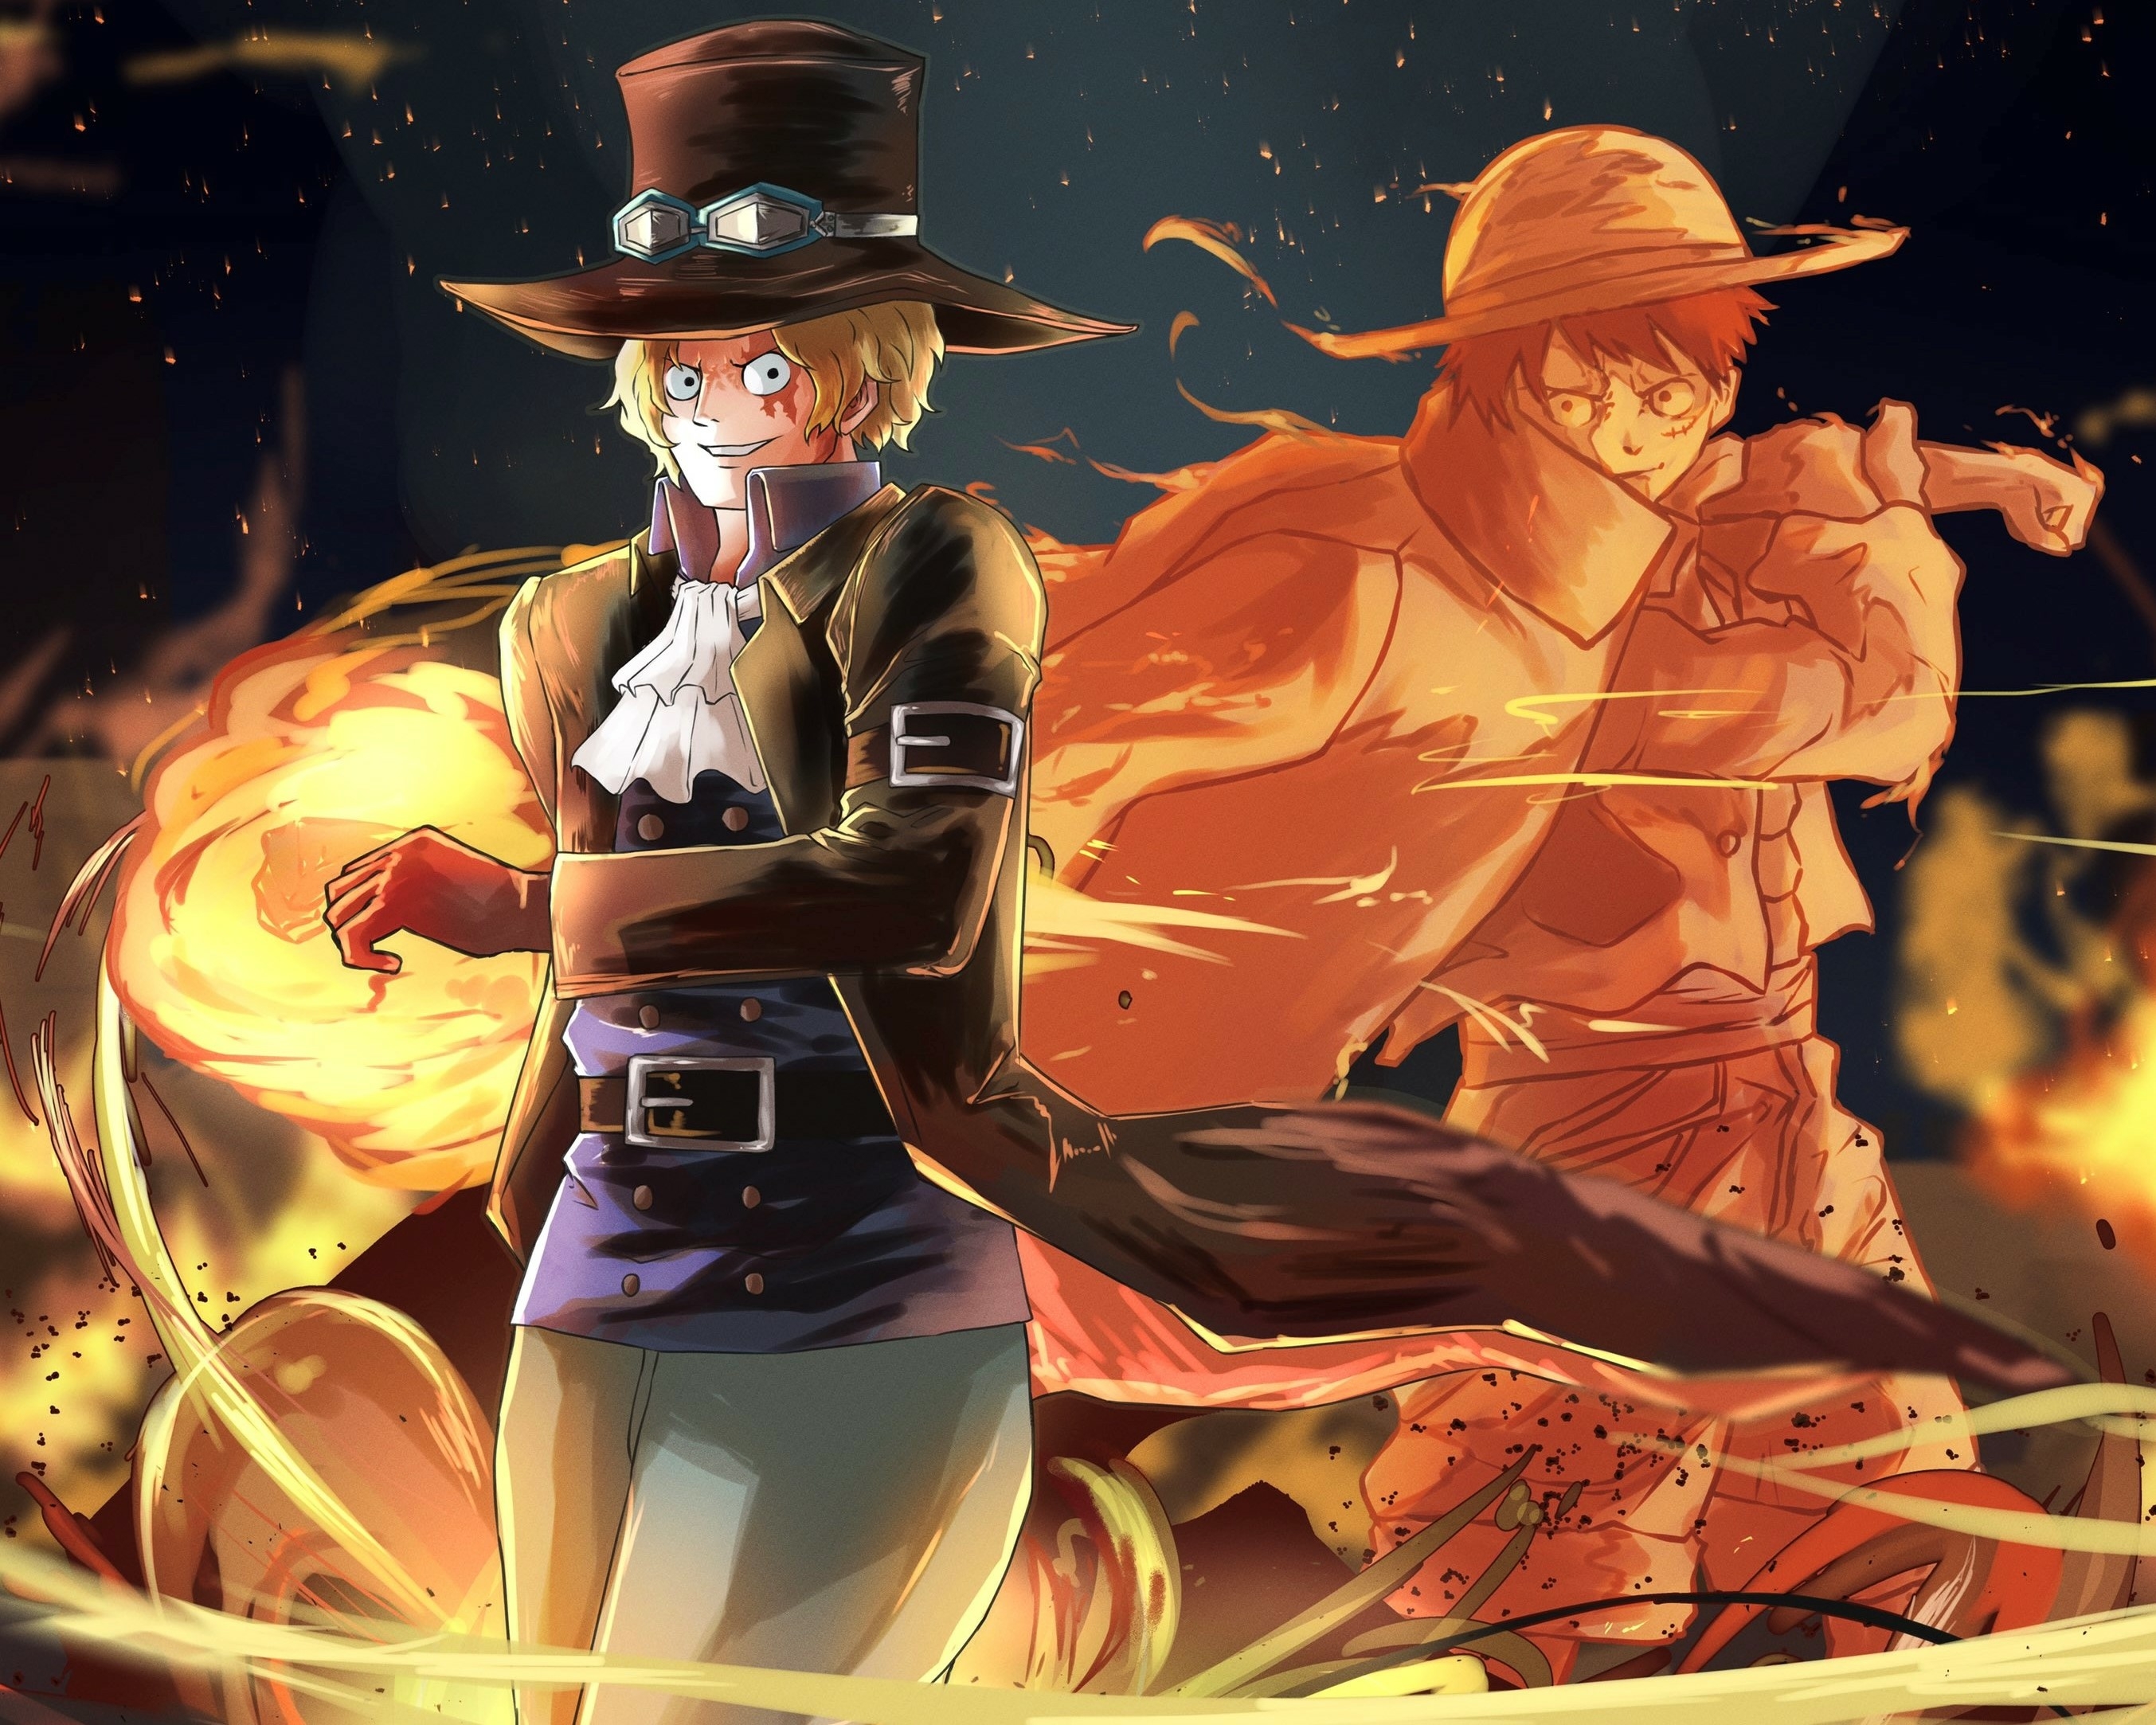 Sabo One Piece Wallpapers Hd For Desktop Backgrounds | Images and ...